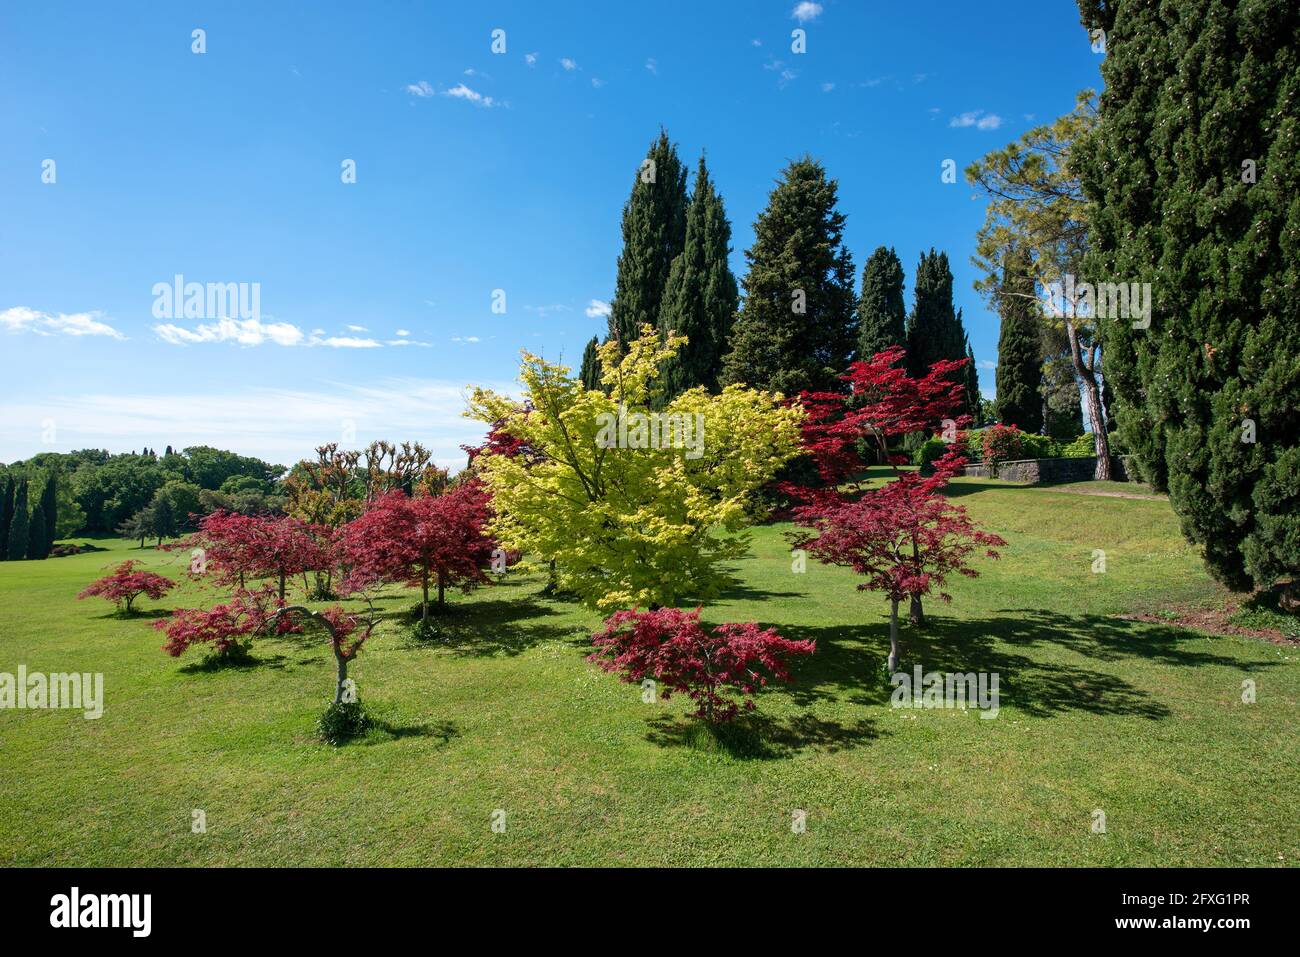 Ornamental trees and shrubs with colorful foliage in a park or botanical garden with expansive neat green lawns and cypress trees in the distance Stock Photo